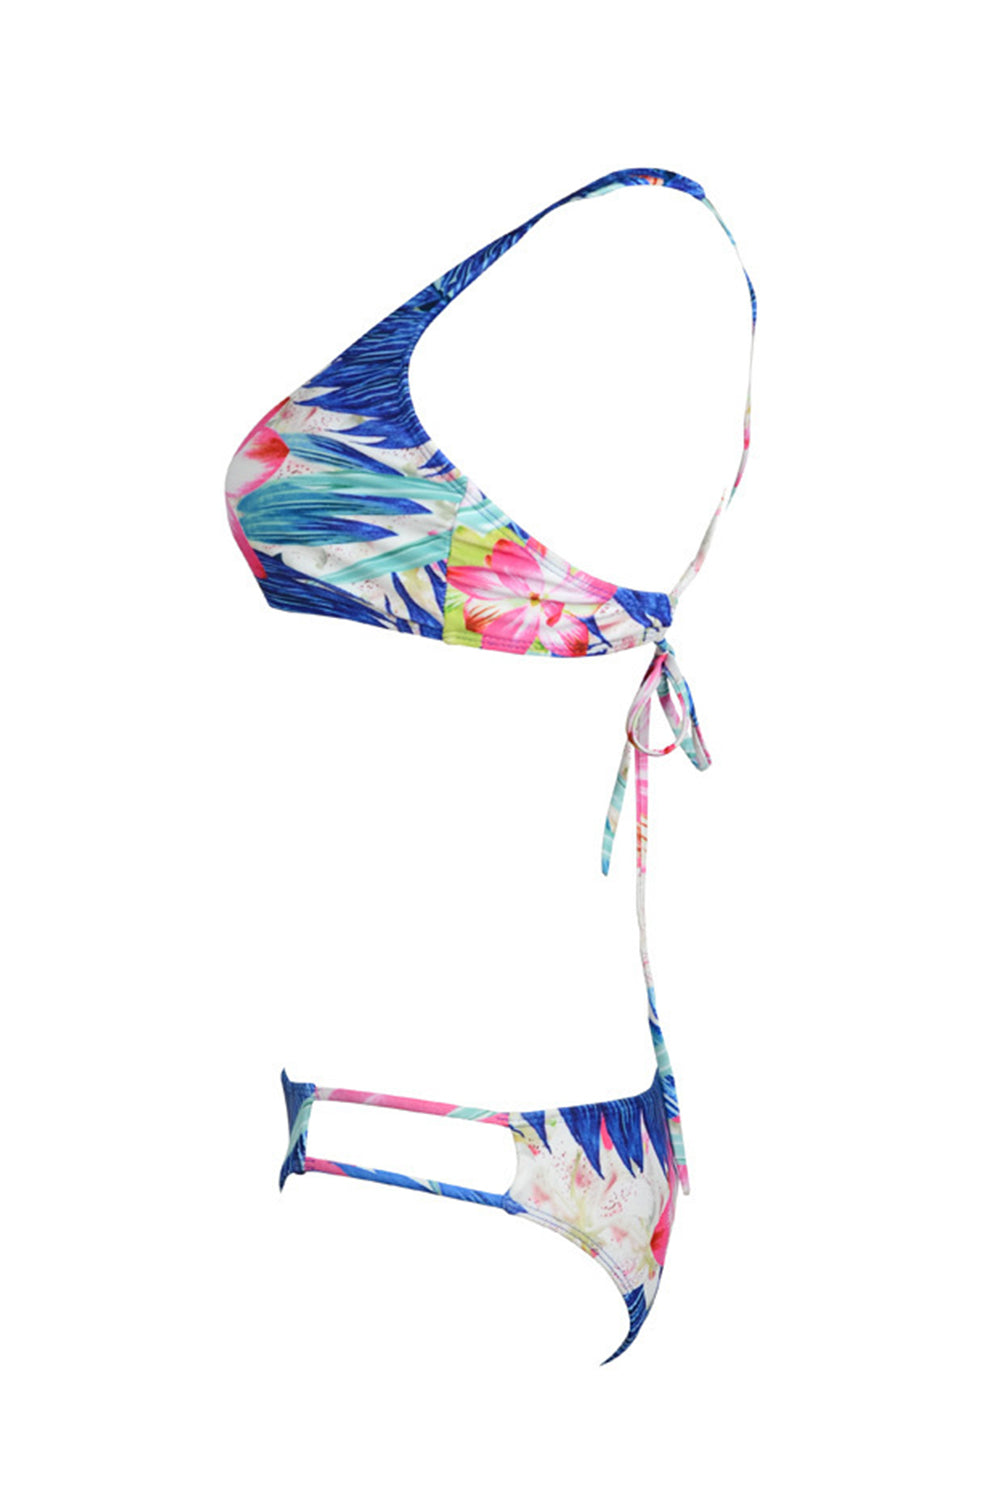 Iyasson Floral Printing Trendy Sport Style High Neck Bikini Top with Double-string Bottom